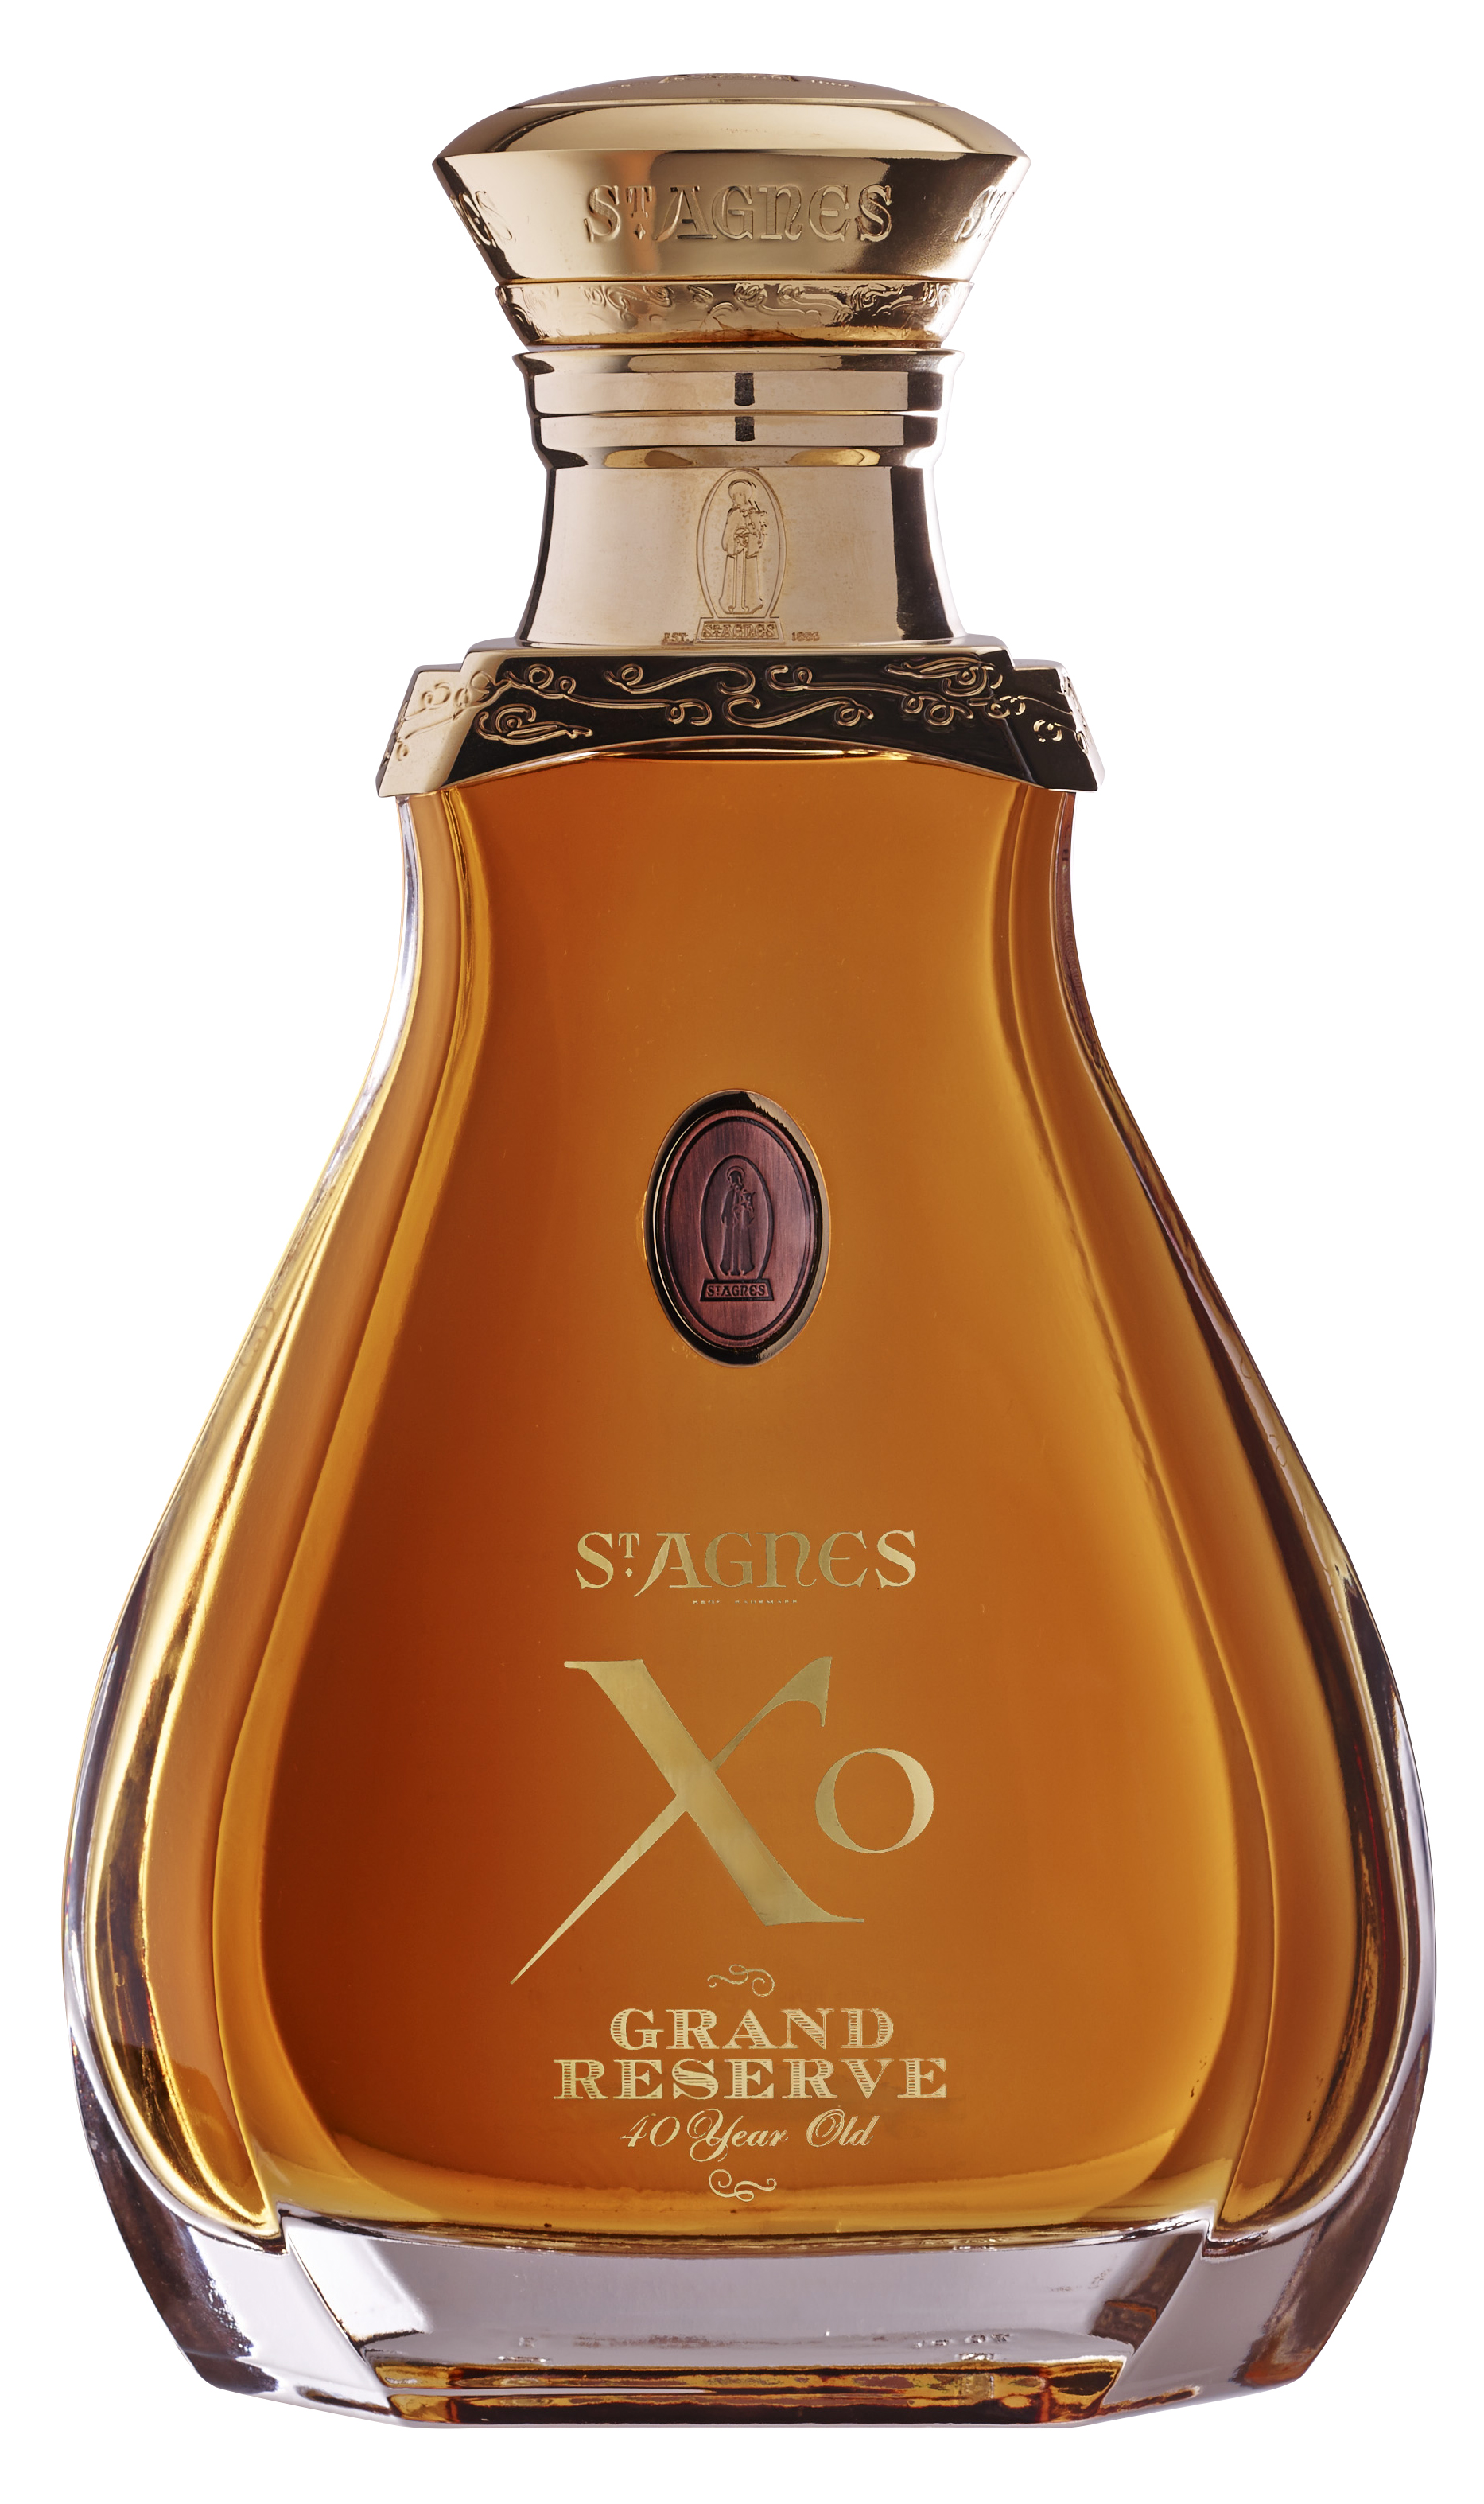 XO Grand Reserve 40 Year Old